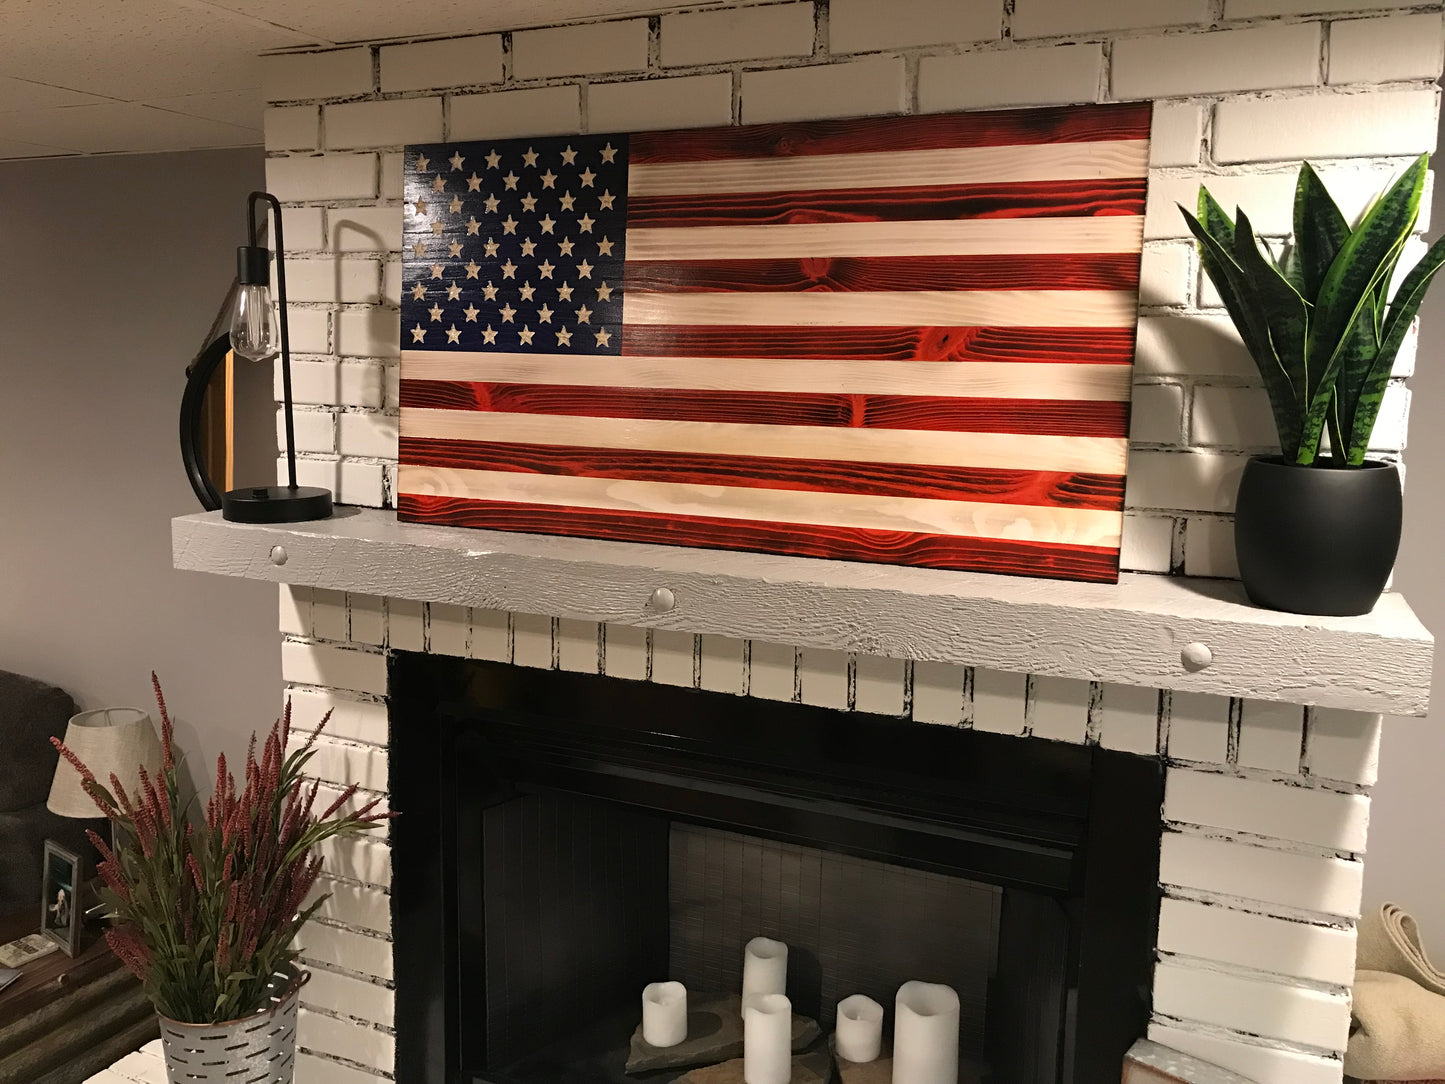 "We the People" The Original Red, White and Blue Charred American Wooden Flag, Rustic Decor, Handcrafted